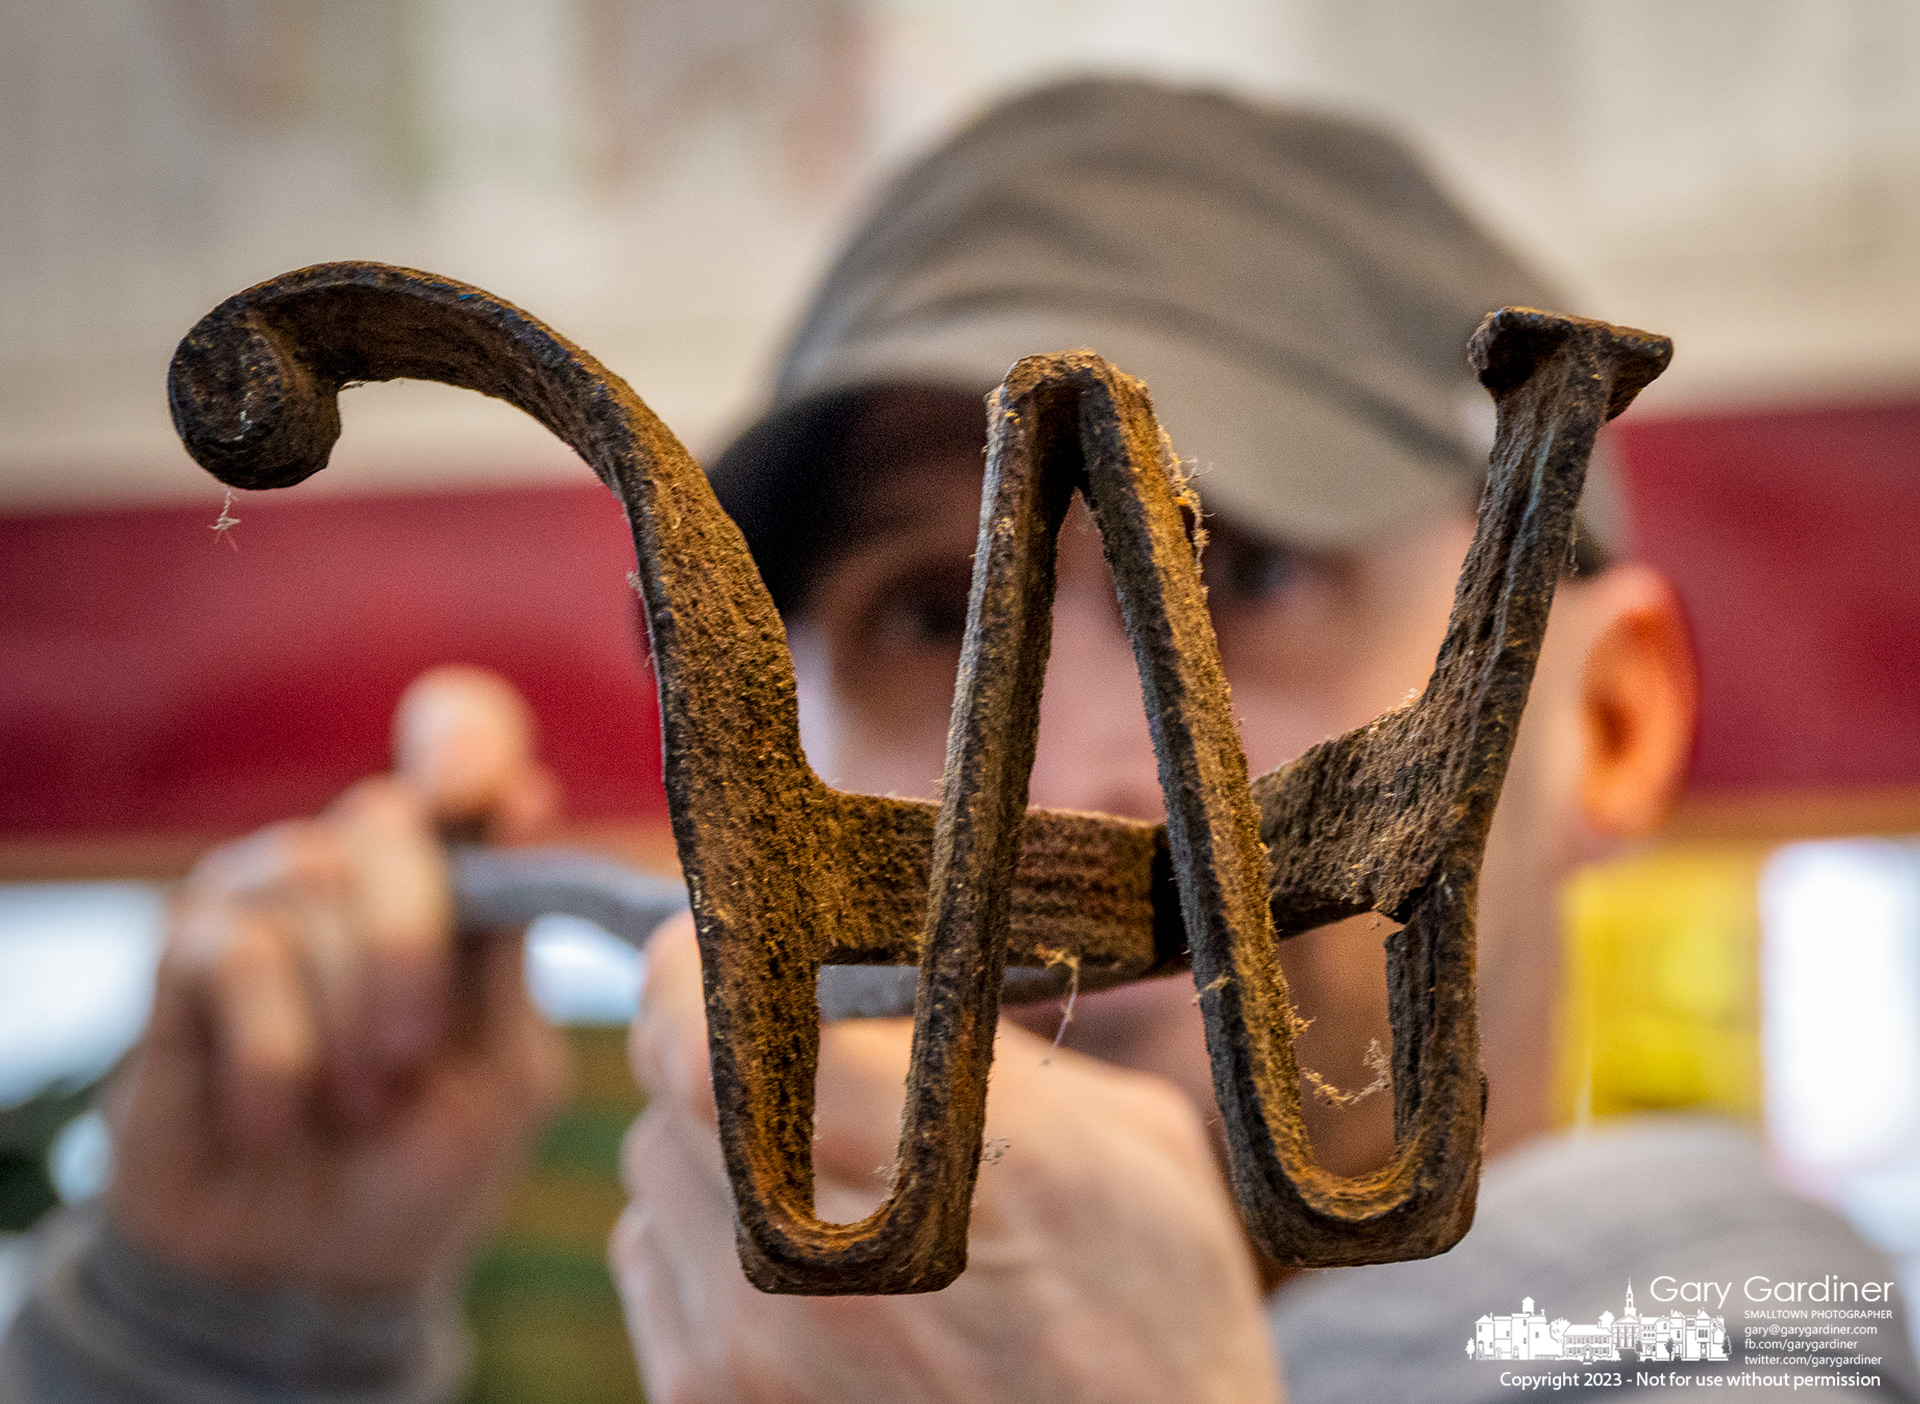 Westerville Antiques owner Luke Ernst holds the "W" branding iron he recently purchased as a rare item once used to brand cattle perhaps on a Westerville cattle farm. My Final Photo for April 6, 2023.